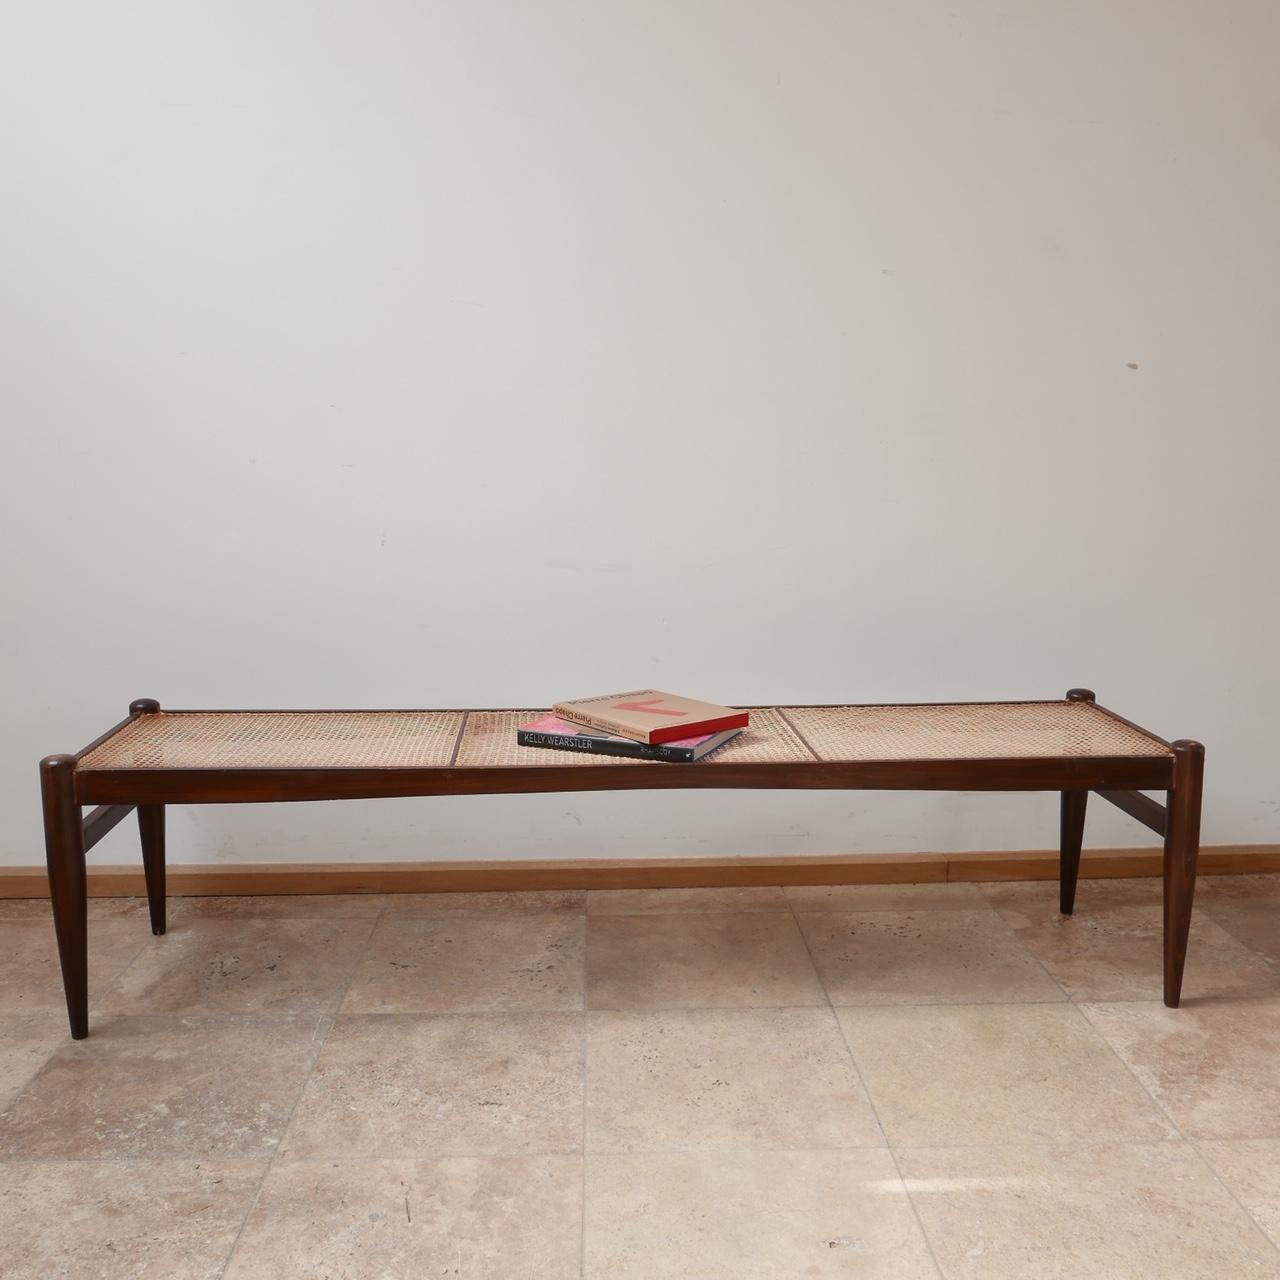 A wildly stylish long cane bench which could be used as an elegant coffee table. 

Sweden, circa 1950s. 

Good condition, some scuffs and marks commensurate with age. 

Dimensions: 45 D x 180 W x 45 H in cm.

Delivery: POA.

